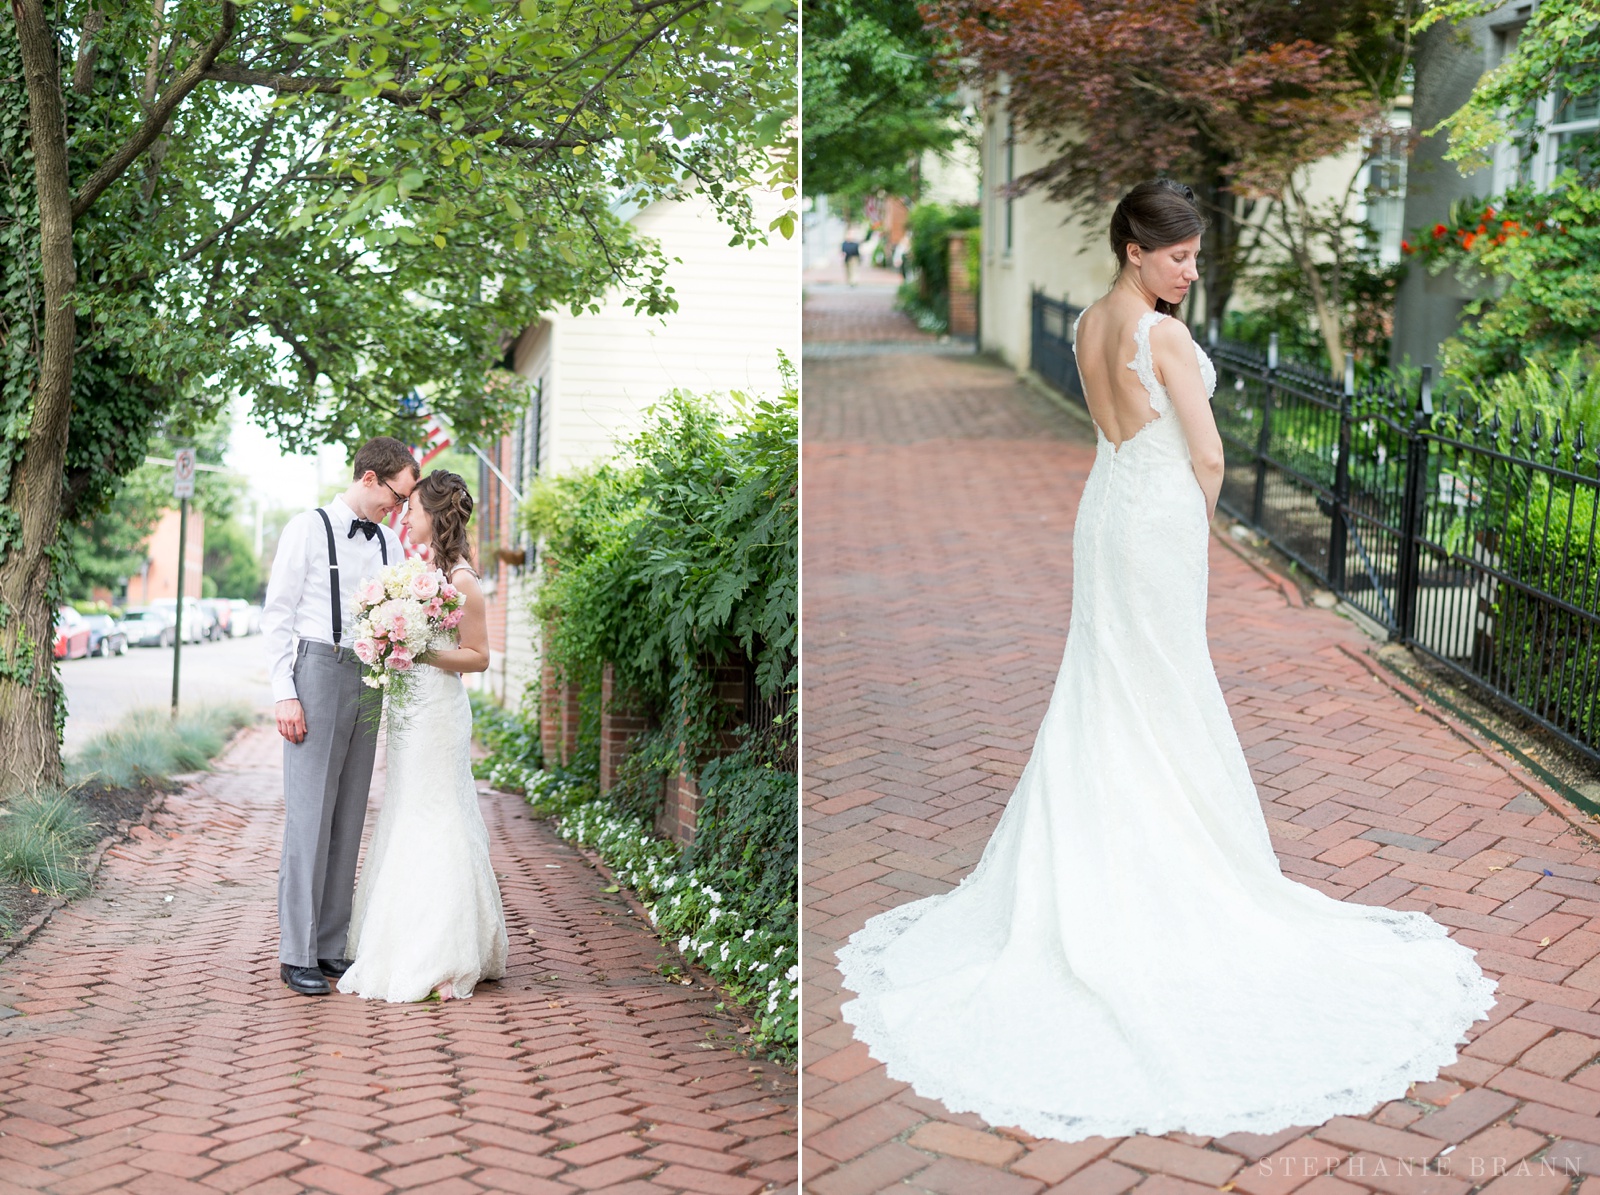 beautiful-bride-and-groom-portraits-on-a-brick-path-with-trees